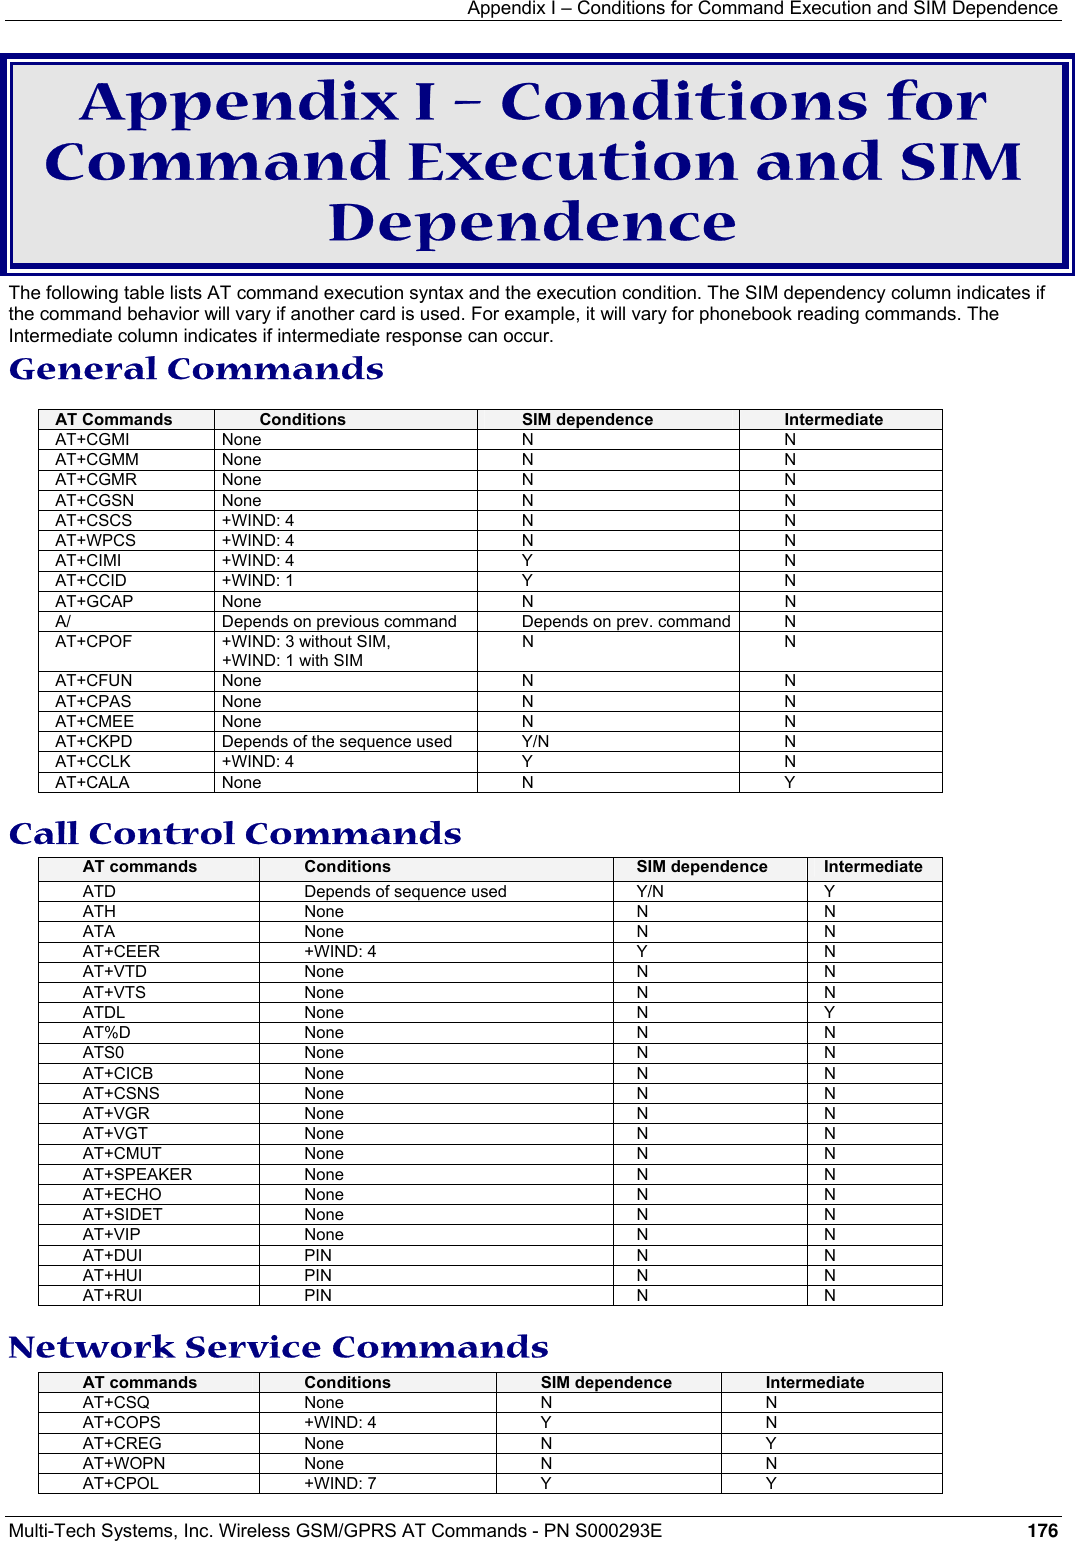 Appendix I – Conditions for Command Execution and SIM Dependence Multi-Tech Systems, Inc. Wireless GSM/GPRS AT Commands - PN S000293E 176  Appendix I – Conditions for Command Execution and SIM Dependence The following table lists AT command execution syntax and the execution condition. The SIM dependency column indicates if the command behavior will vary if another card is used. For example, it will vary for phonebook reading commands. The Intermediate column indicates if intermediate response can occur.    General Commands  AT Commands  Conditions  SIM dependence  Intermediate AT+CGMI None  N  N AT+CGMM None  N  N AT+CGMR None  N  N AT+CGSN None  N  N AT+CSCS +WIND: 4  N  N AT+WPCS +WIND: 4  N  N AT+CIMI +WIND: 4  Y  N AT+CCID +WIND: 1  Y  N AT+GCAP None  N  N A/  Depends on previous command  Depends on prev. command N AT+CPOF  +WIND: 3 without SIM,  +WIND: 1 with SIM N N AT+CFUN None  N  N AT+CPAS None  N  N AT+CMEE None  N  N AT+CKPD  Depends of the sequence used  Y/N  N AT+CCLK +WIND: 4  Y  N AT+CALA None  N  Y Call Control Commands AT commands  Conditions  SIM dependence  Intermediate ATD  Depends of sequence used  Y/N  Y ATH None  N N ATA None  N N AT+CEER +WIND: 4  Y  N AT+VTD None  N  N AT+VTS None  N  N ATDL None  N Y AT%D None  N  N ATS0 None  N N AT+CICB None  N  N AT+CSNS None  N  N AT+VGR None  N  N AT+VGT None  N  N AT+CMUT None  N  N AT+SPEAKER None  N  N AT+ECHO None  N  N AT+SIDET None  N  N AT+VIP None  N  N AT+DUI PIN  N  N AT+HUI PIN  N  N AT+RUI PIN  N  N Network Service Commands AT commands  Conditions  SIM dependence  Intermediate AT+CSQ None  N  N AT+COPS +WIND: 4  Y  N AT+CREG None  N  Y AT+WOPN None  N  N AT+CPOL +WIND: 7  Y  Y  